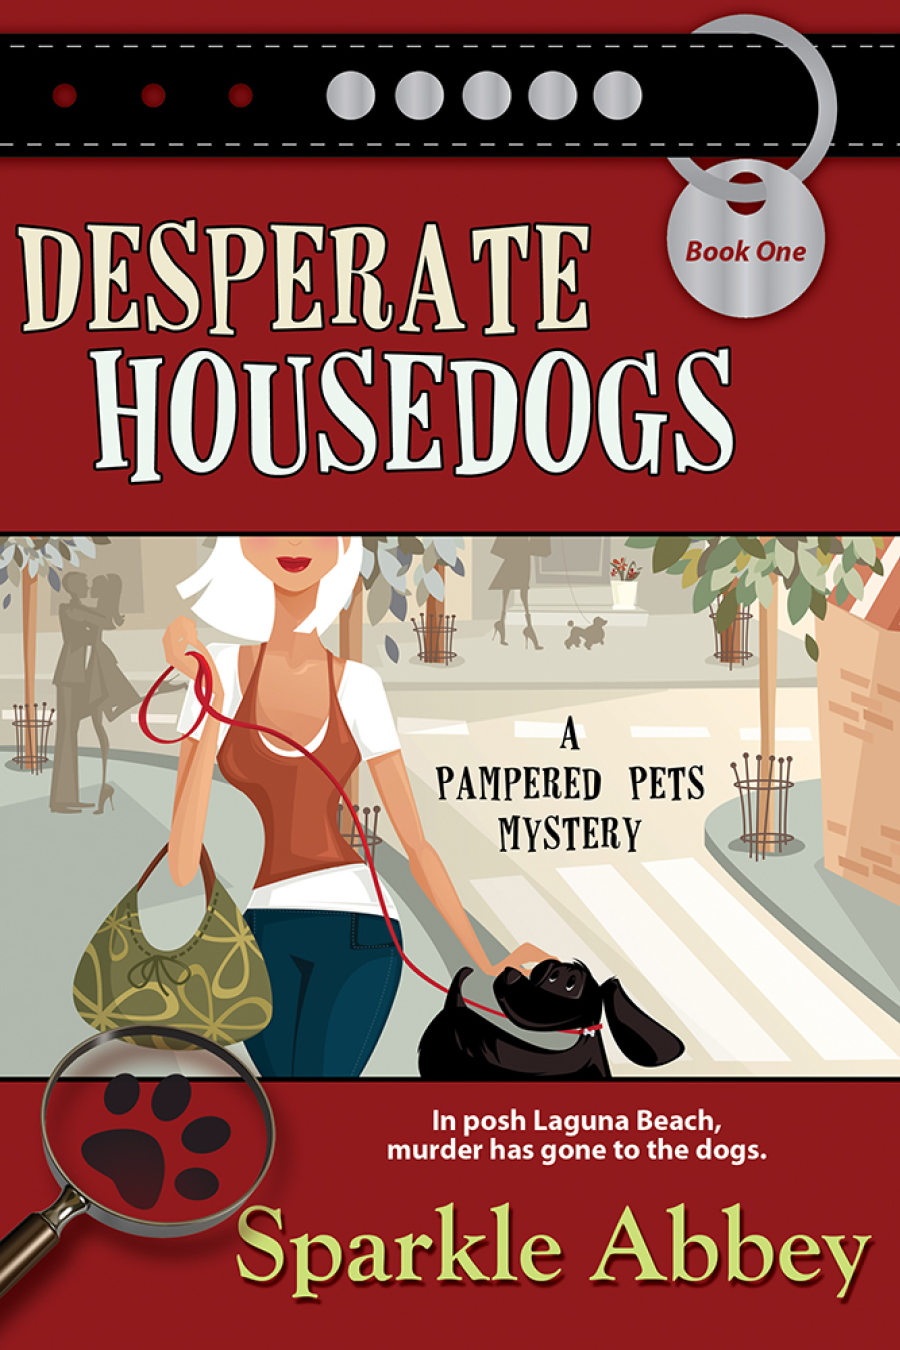 Desparate Housedogs